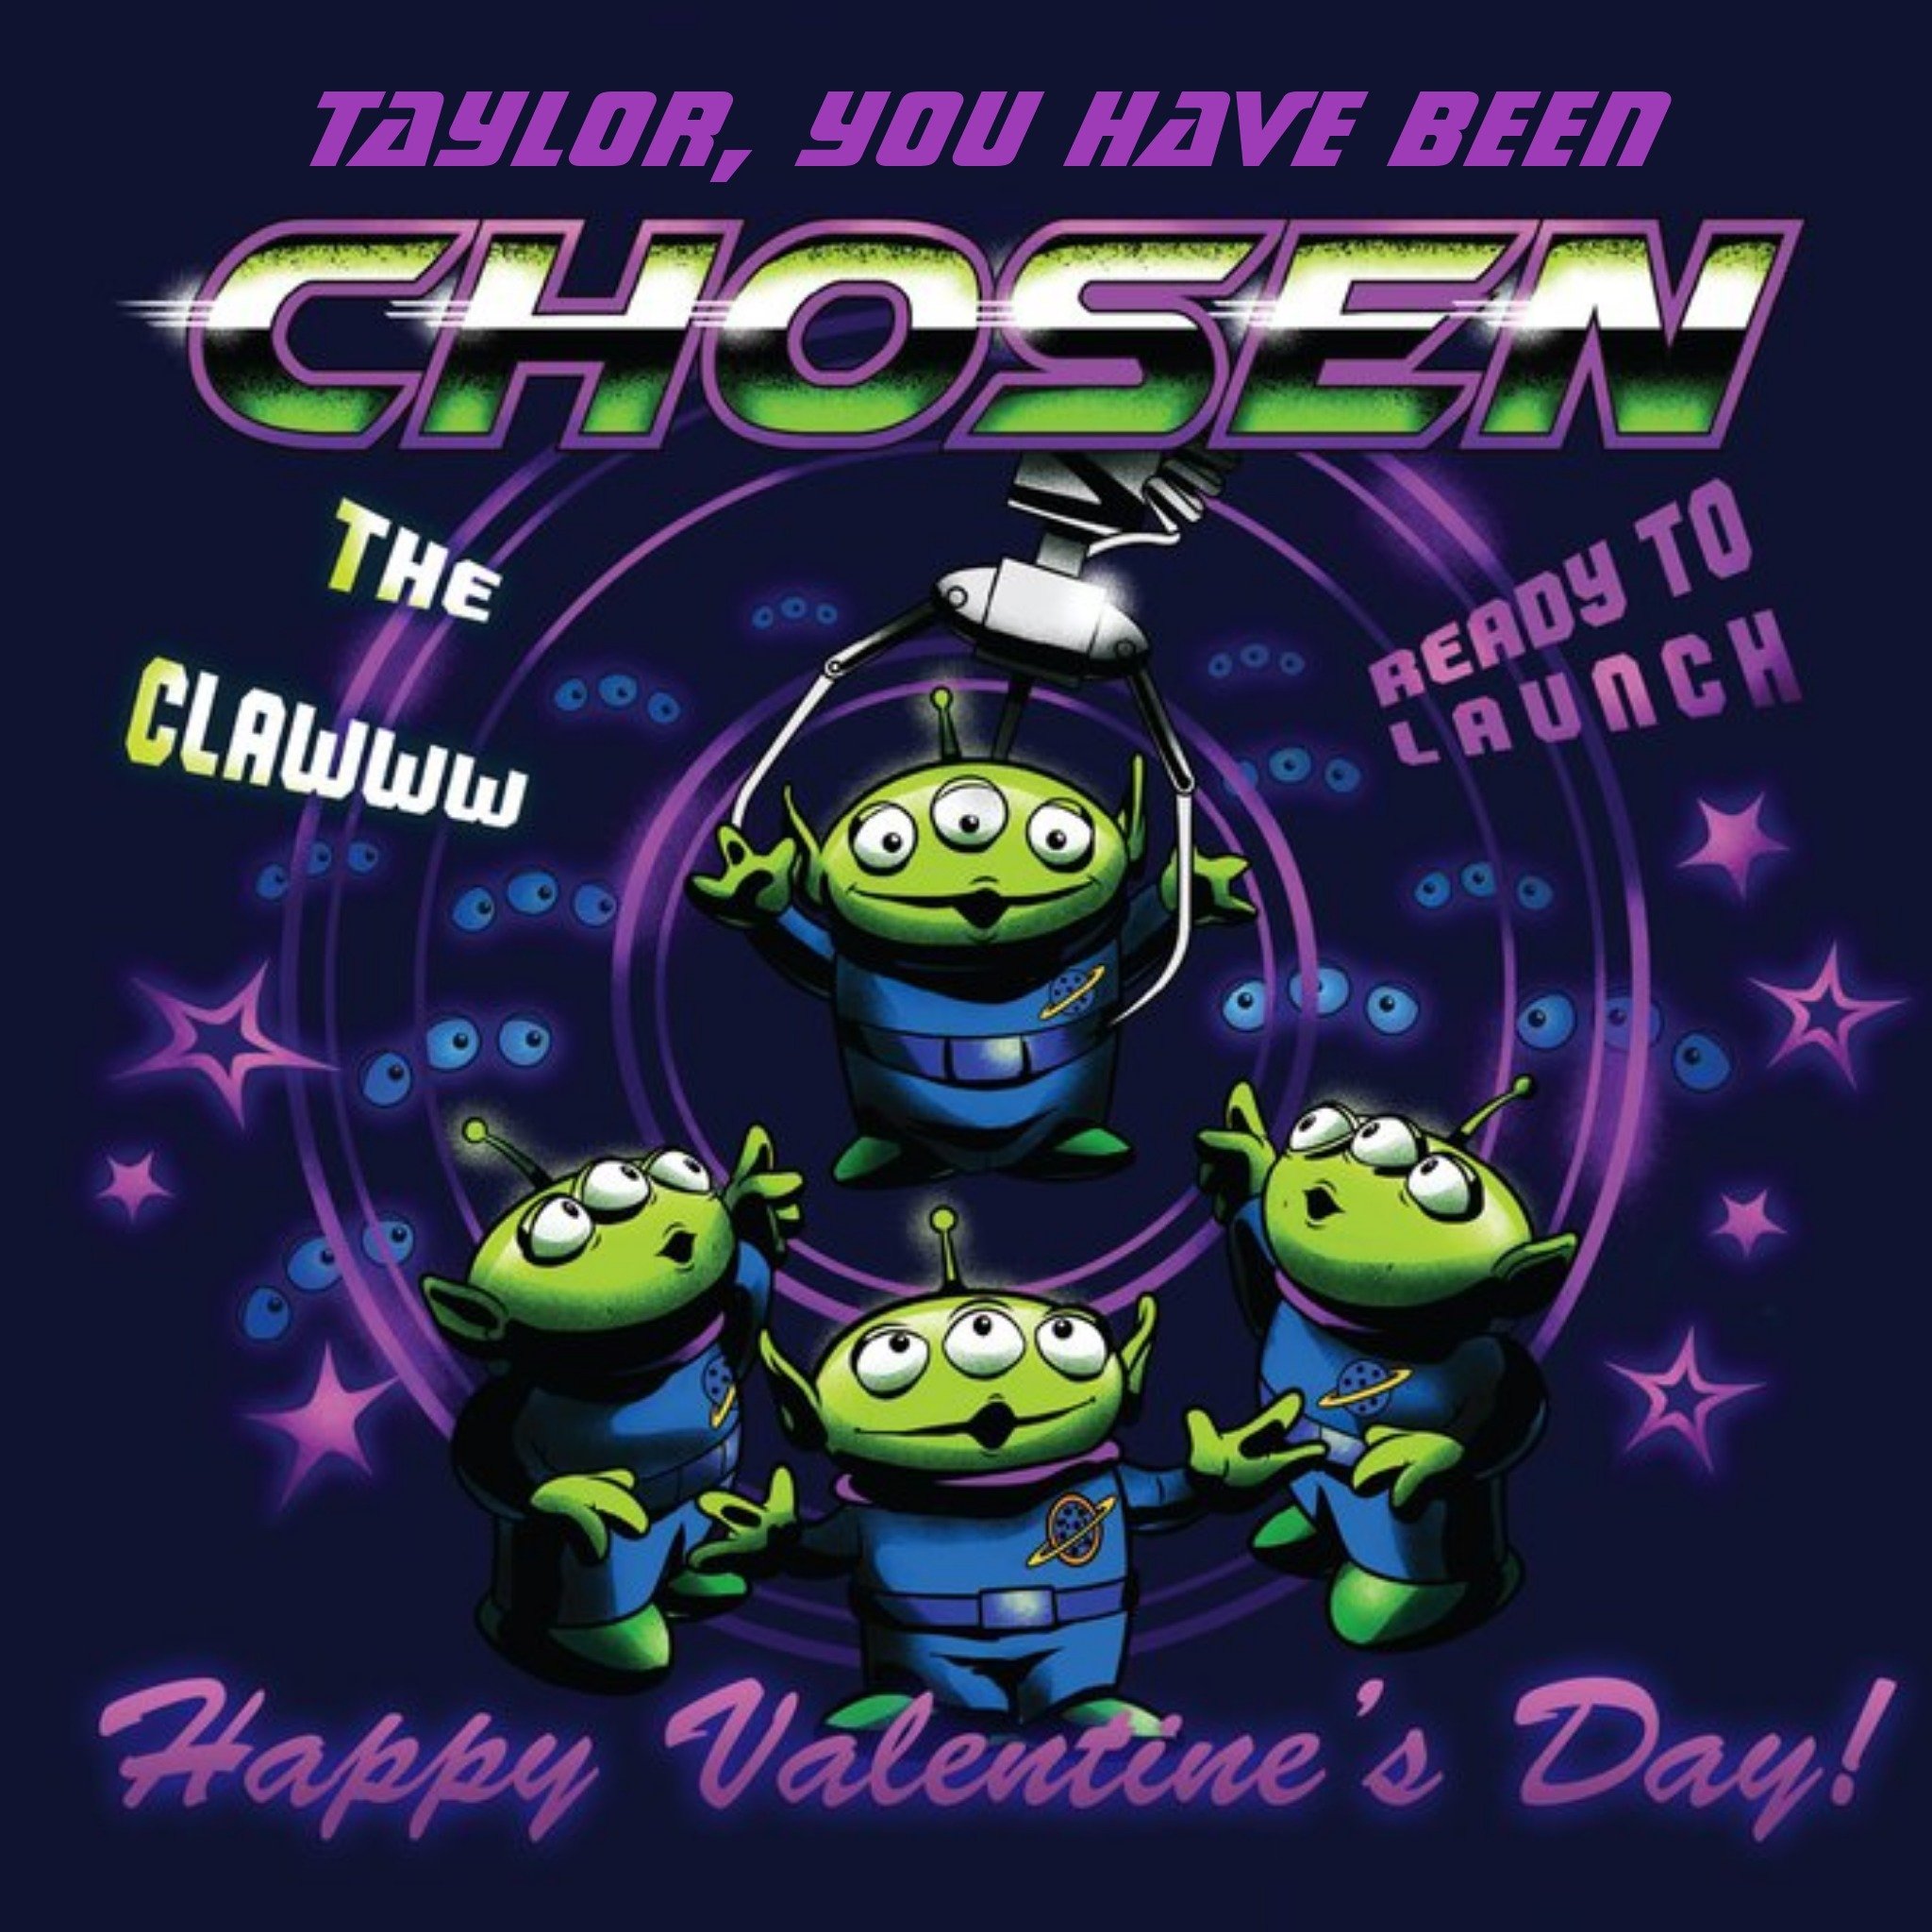 Toy Story Personalised You've Been Chosen Valentine's Day Card, Large